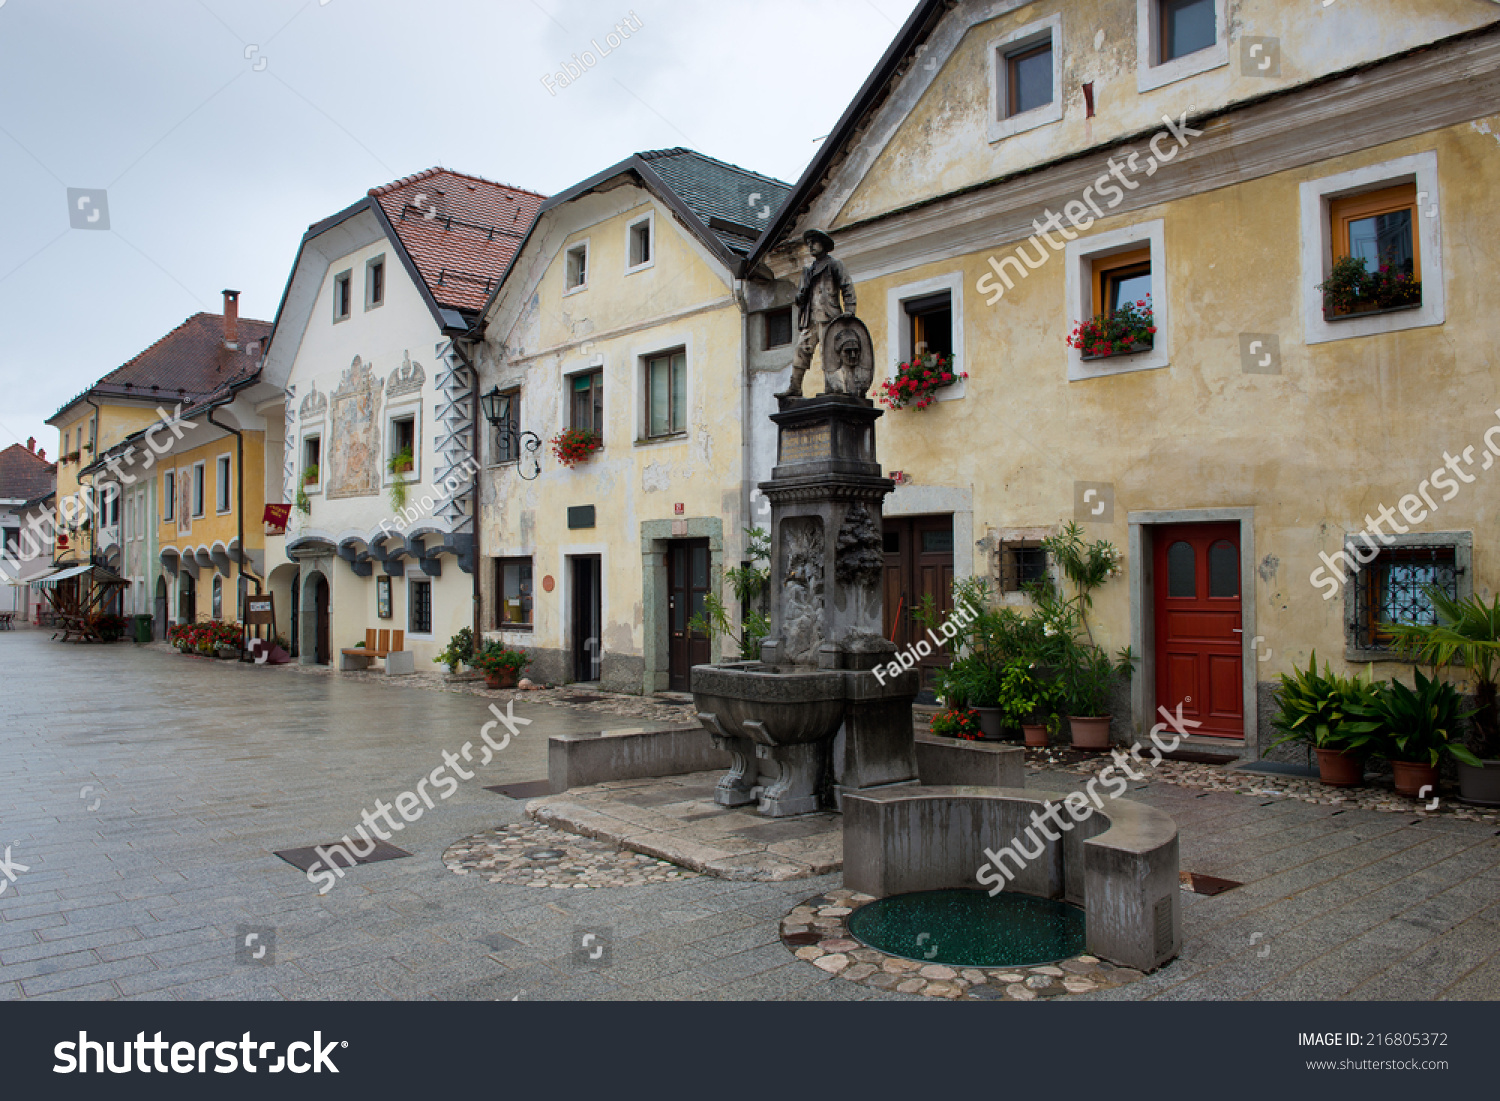 Ancient houses in the main square of Radovljica in Slovenia #216805372